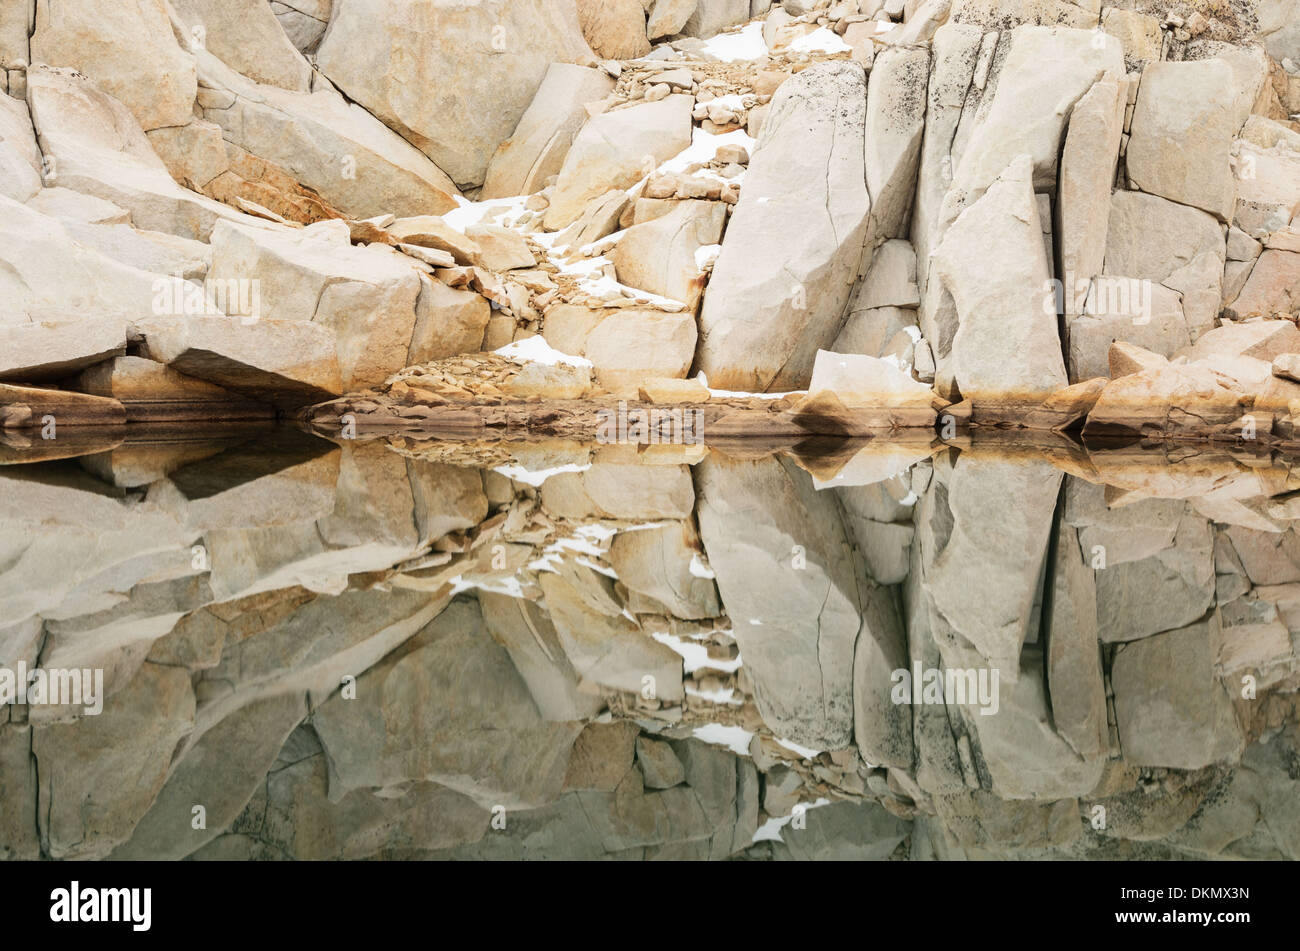 reflection of granite rocks and snow in a still mountain lake Stock Photo